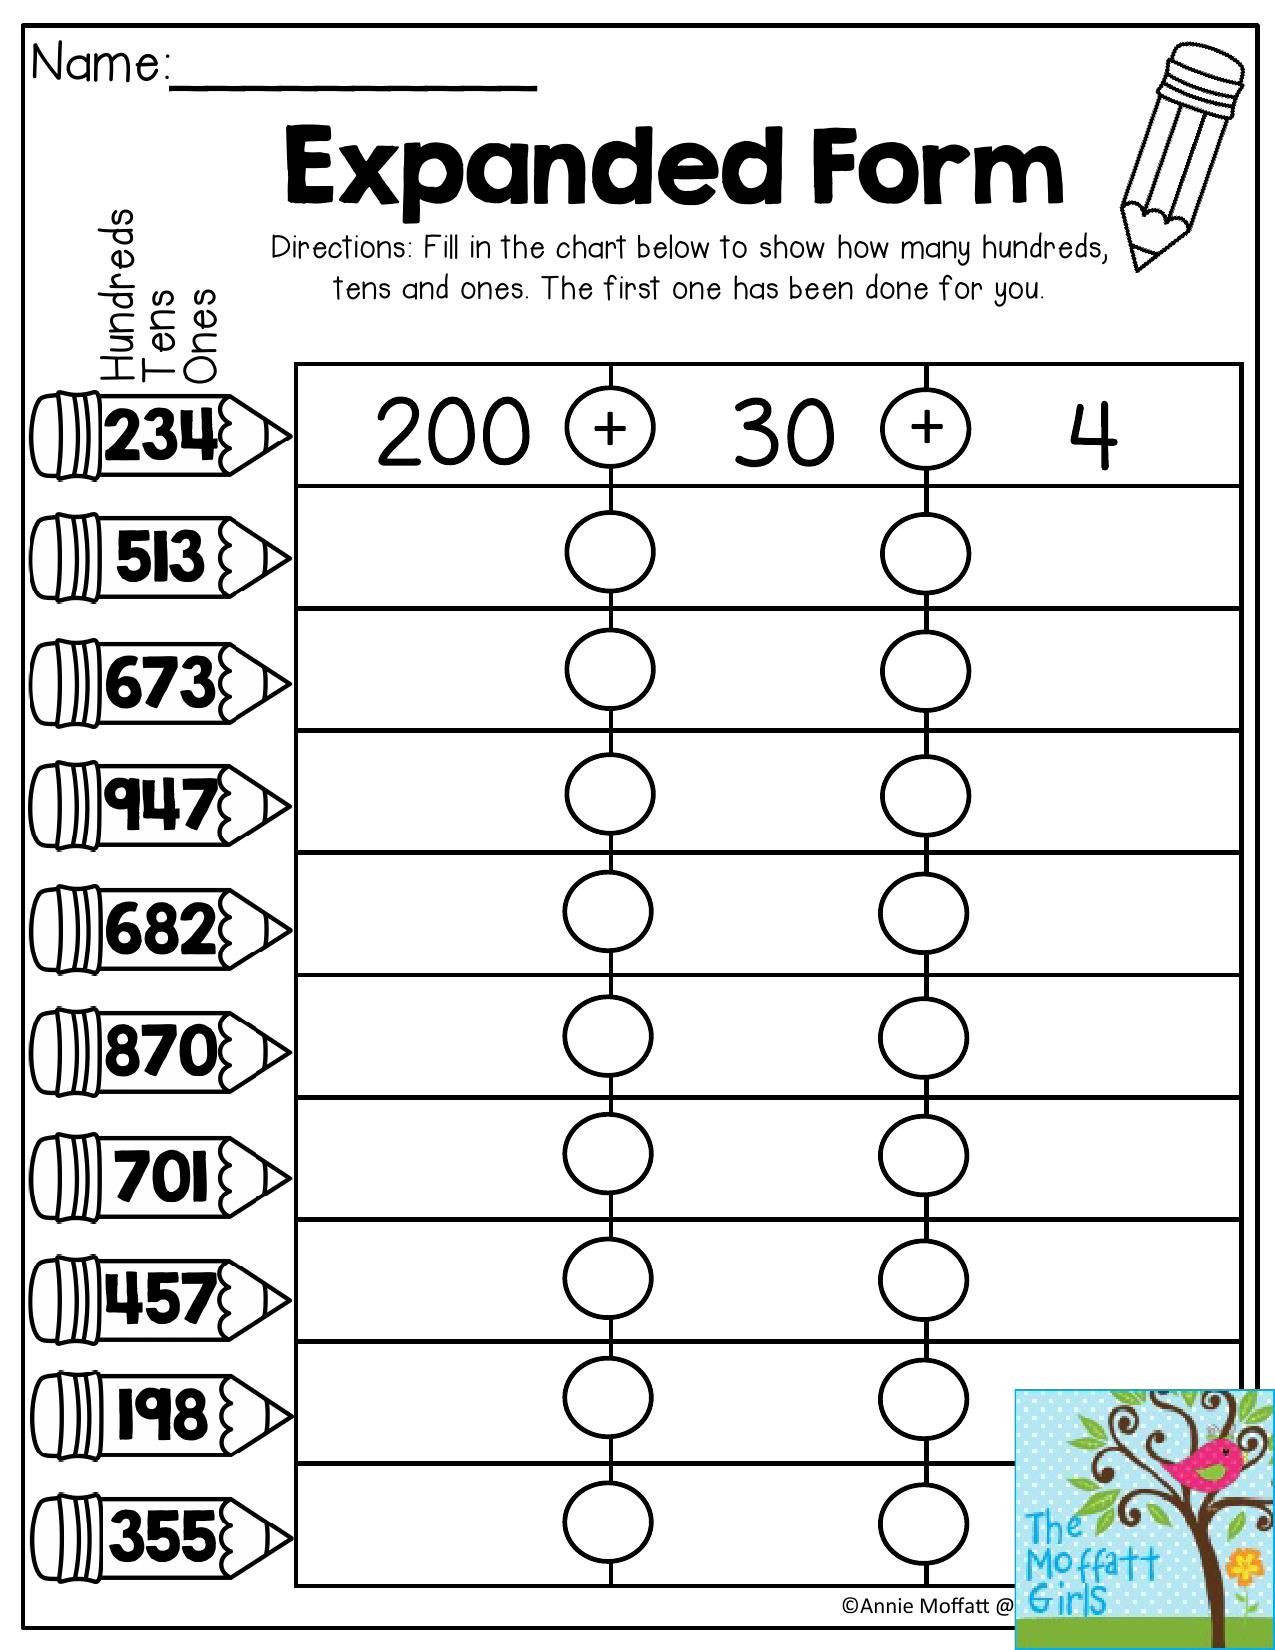 Ones Tens Hundreds Worksheet Expanded form Fill In the Chart to Show How Many Hundreds